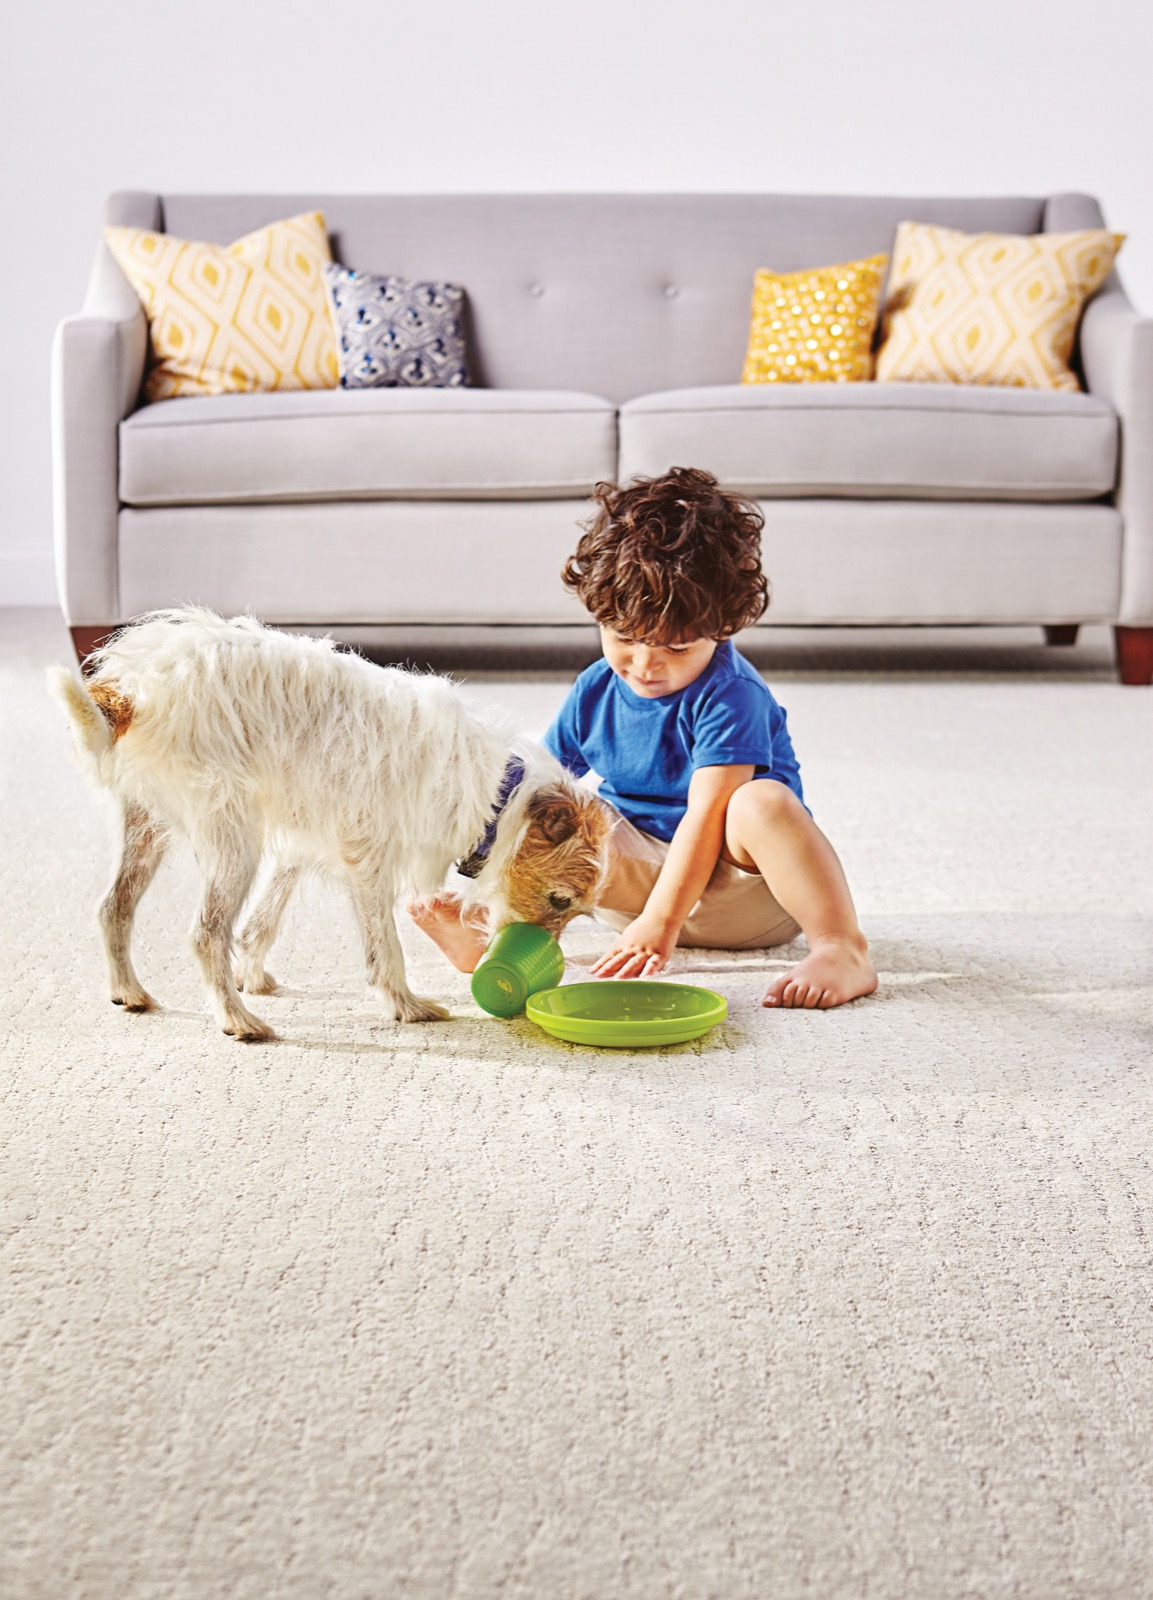 How to Remove Common Carpet Stains